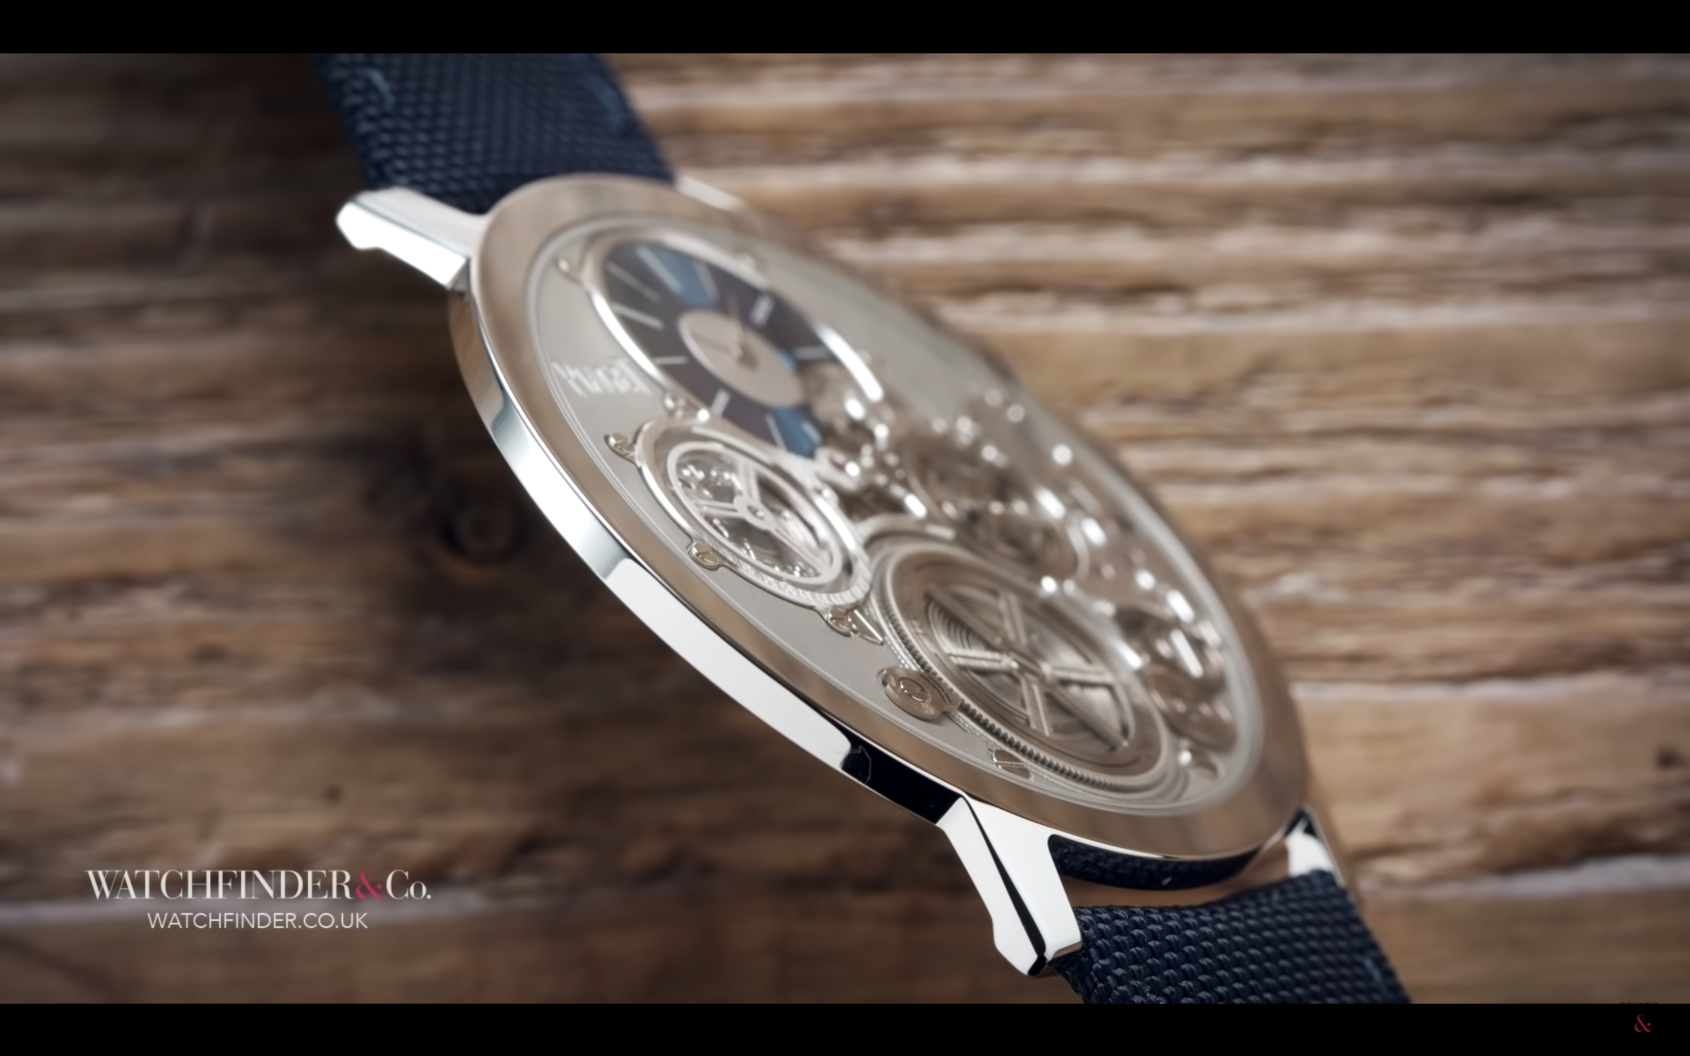 Mr. Watchfinder explains how the thinnest watch ever made came to be